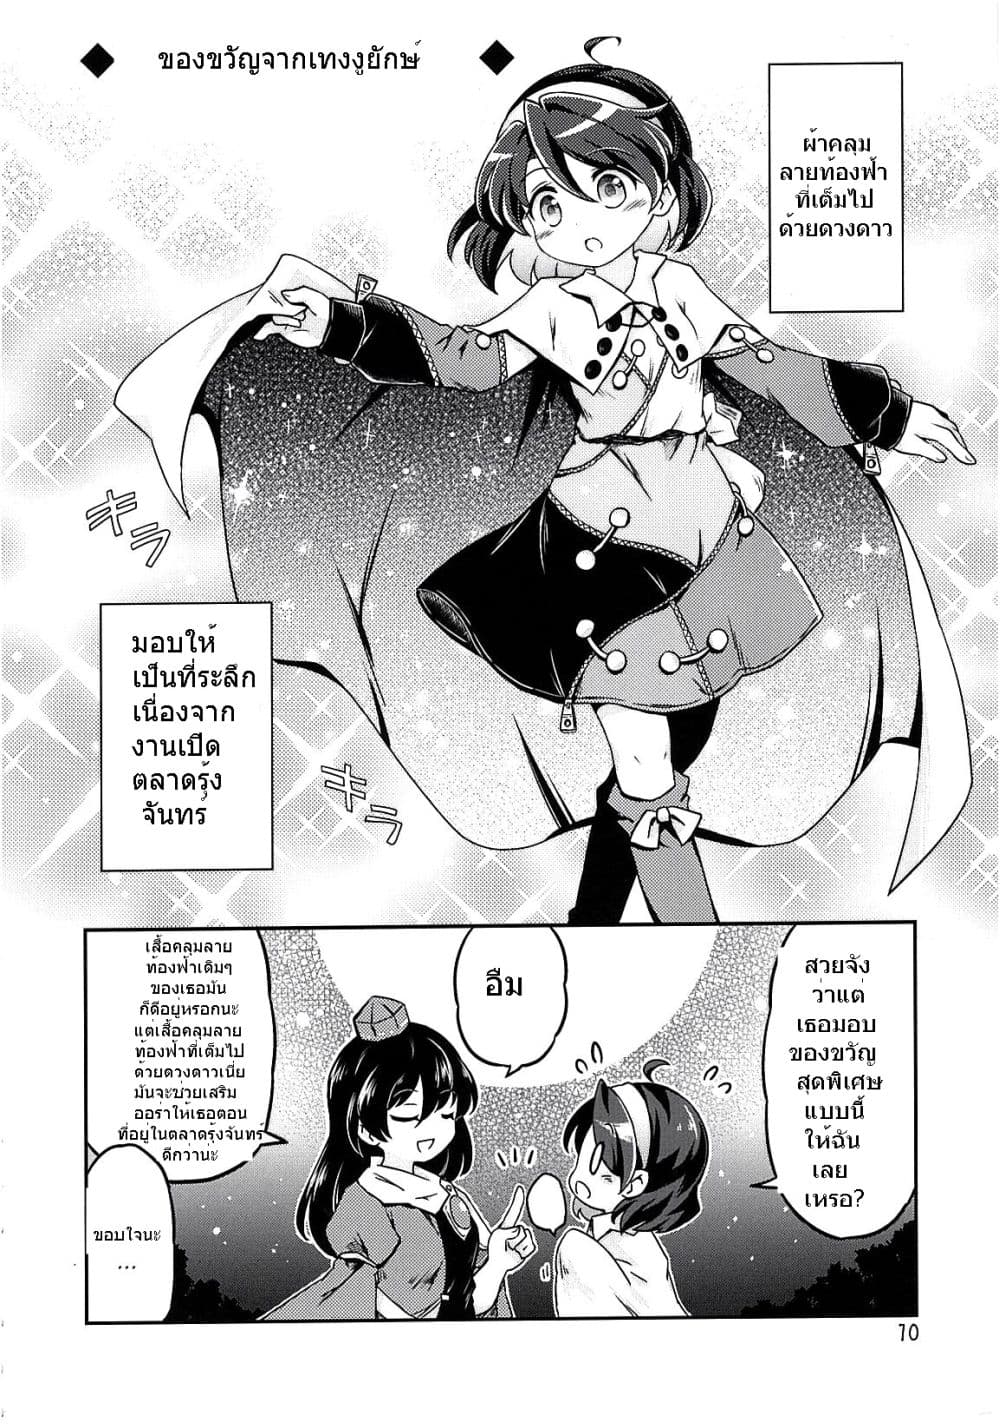 Touhou Project Chima Book By Pote ตอนที่ 2 (10)